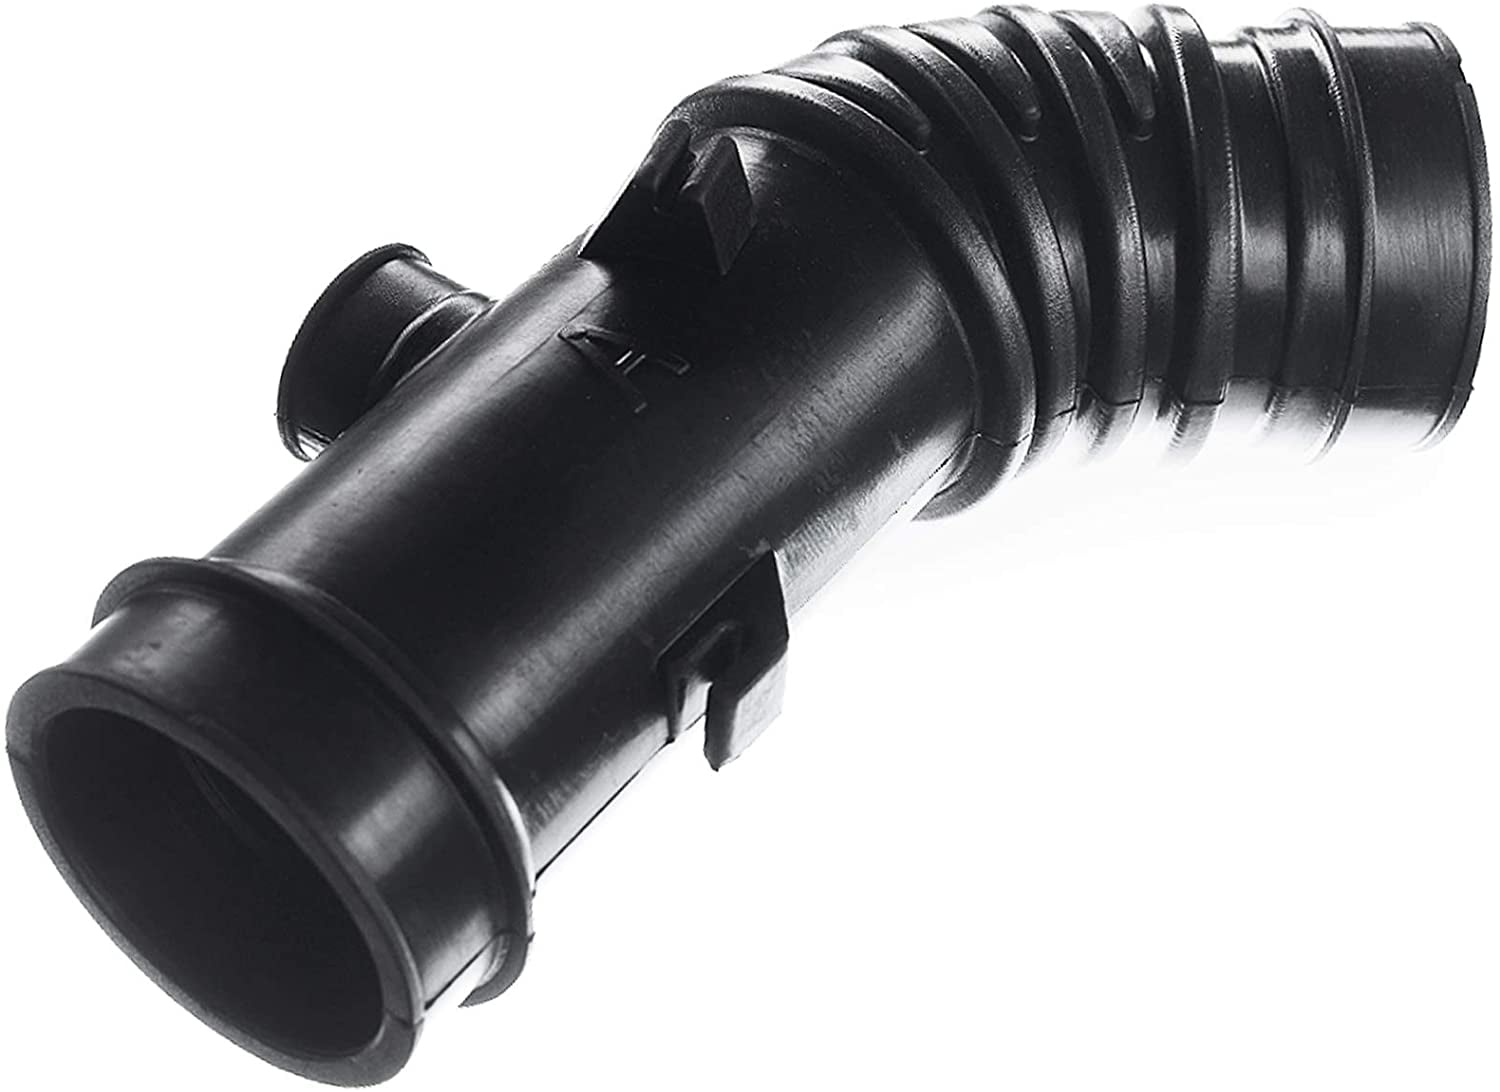 Air Intake Hose for 1993-1997 Toyota Corolla Compatible with 17881-15180 696-726 